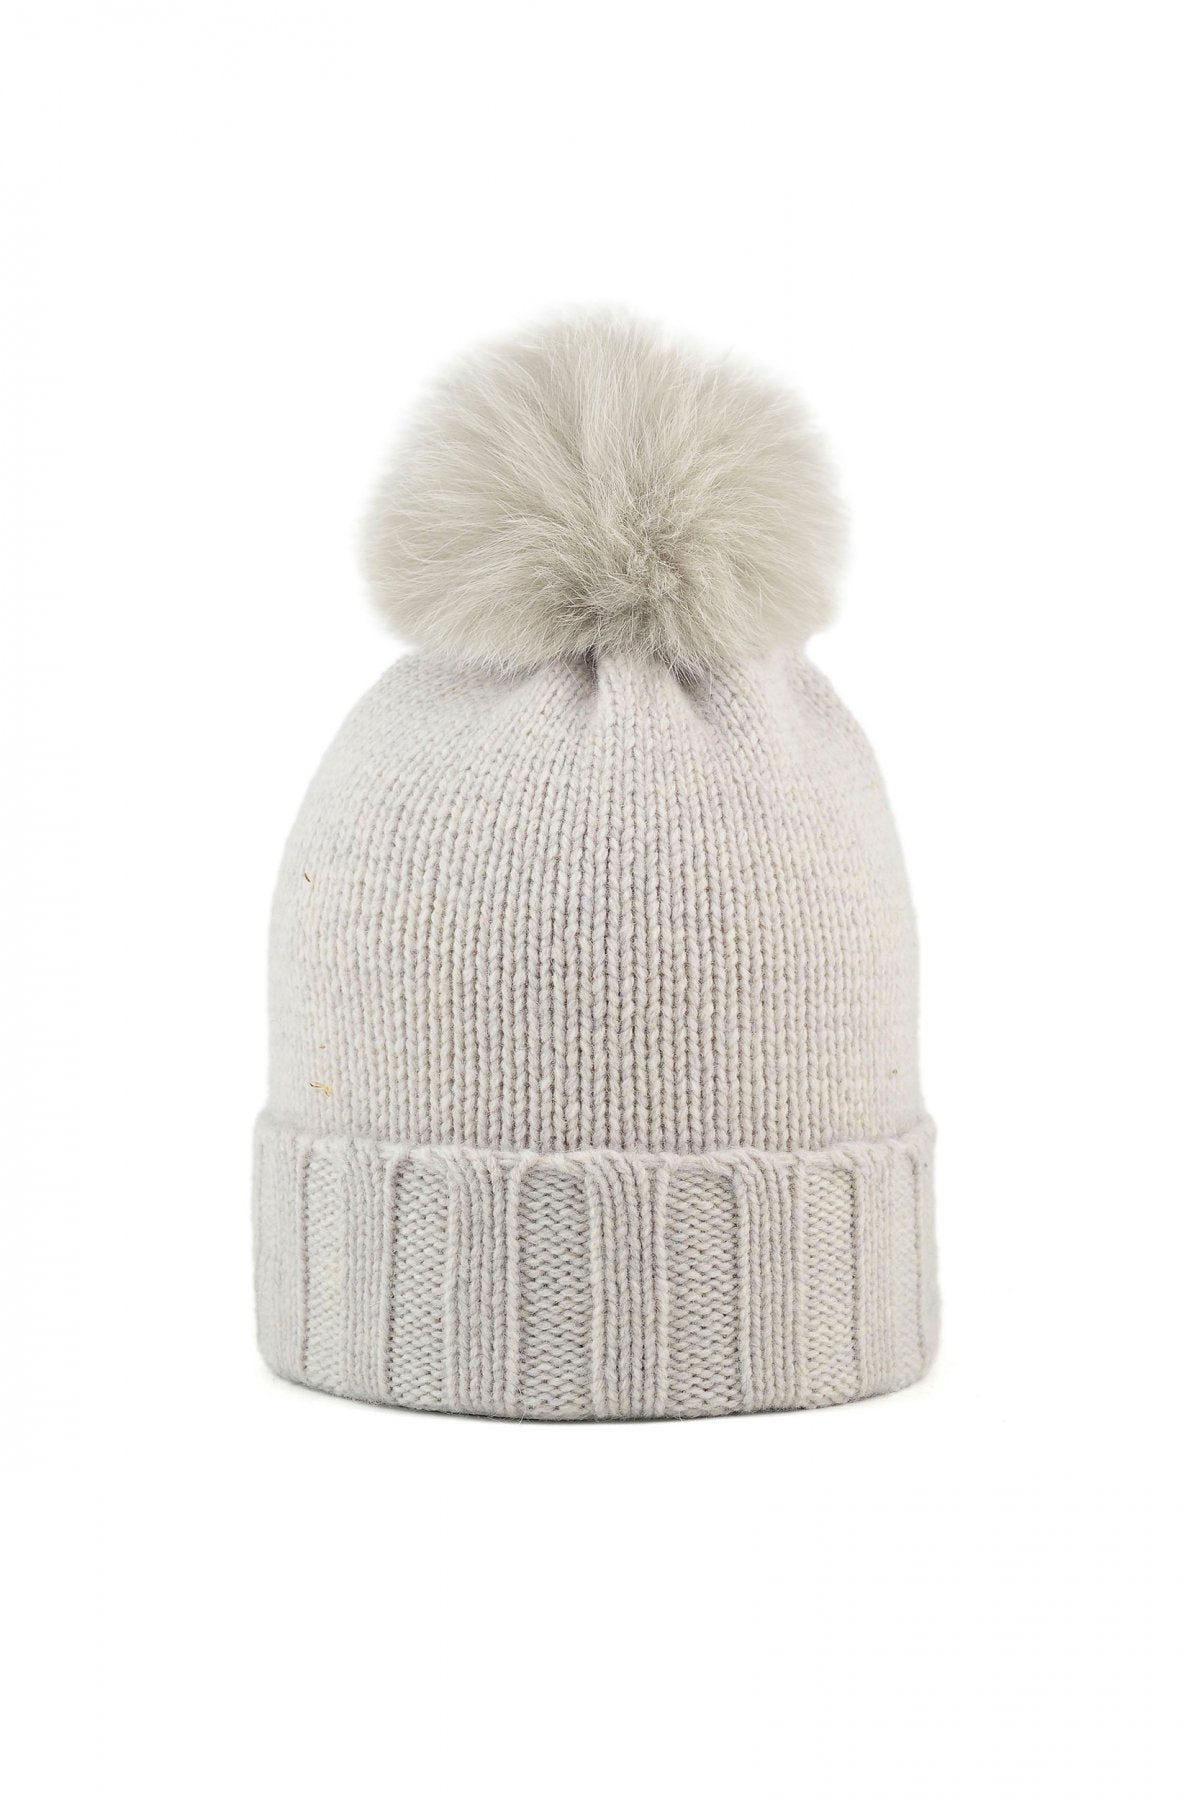 Canadian cappello donna hat with pom